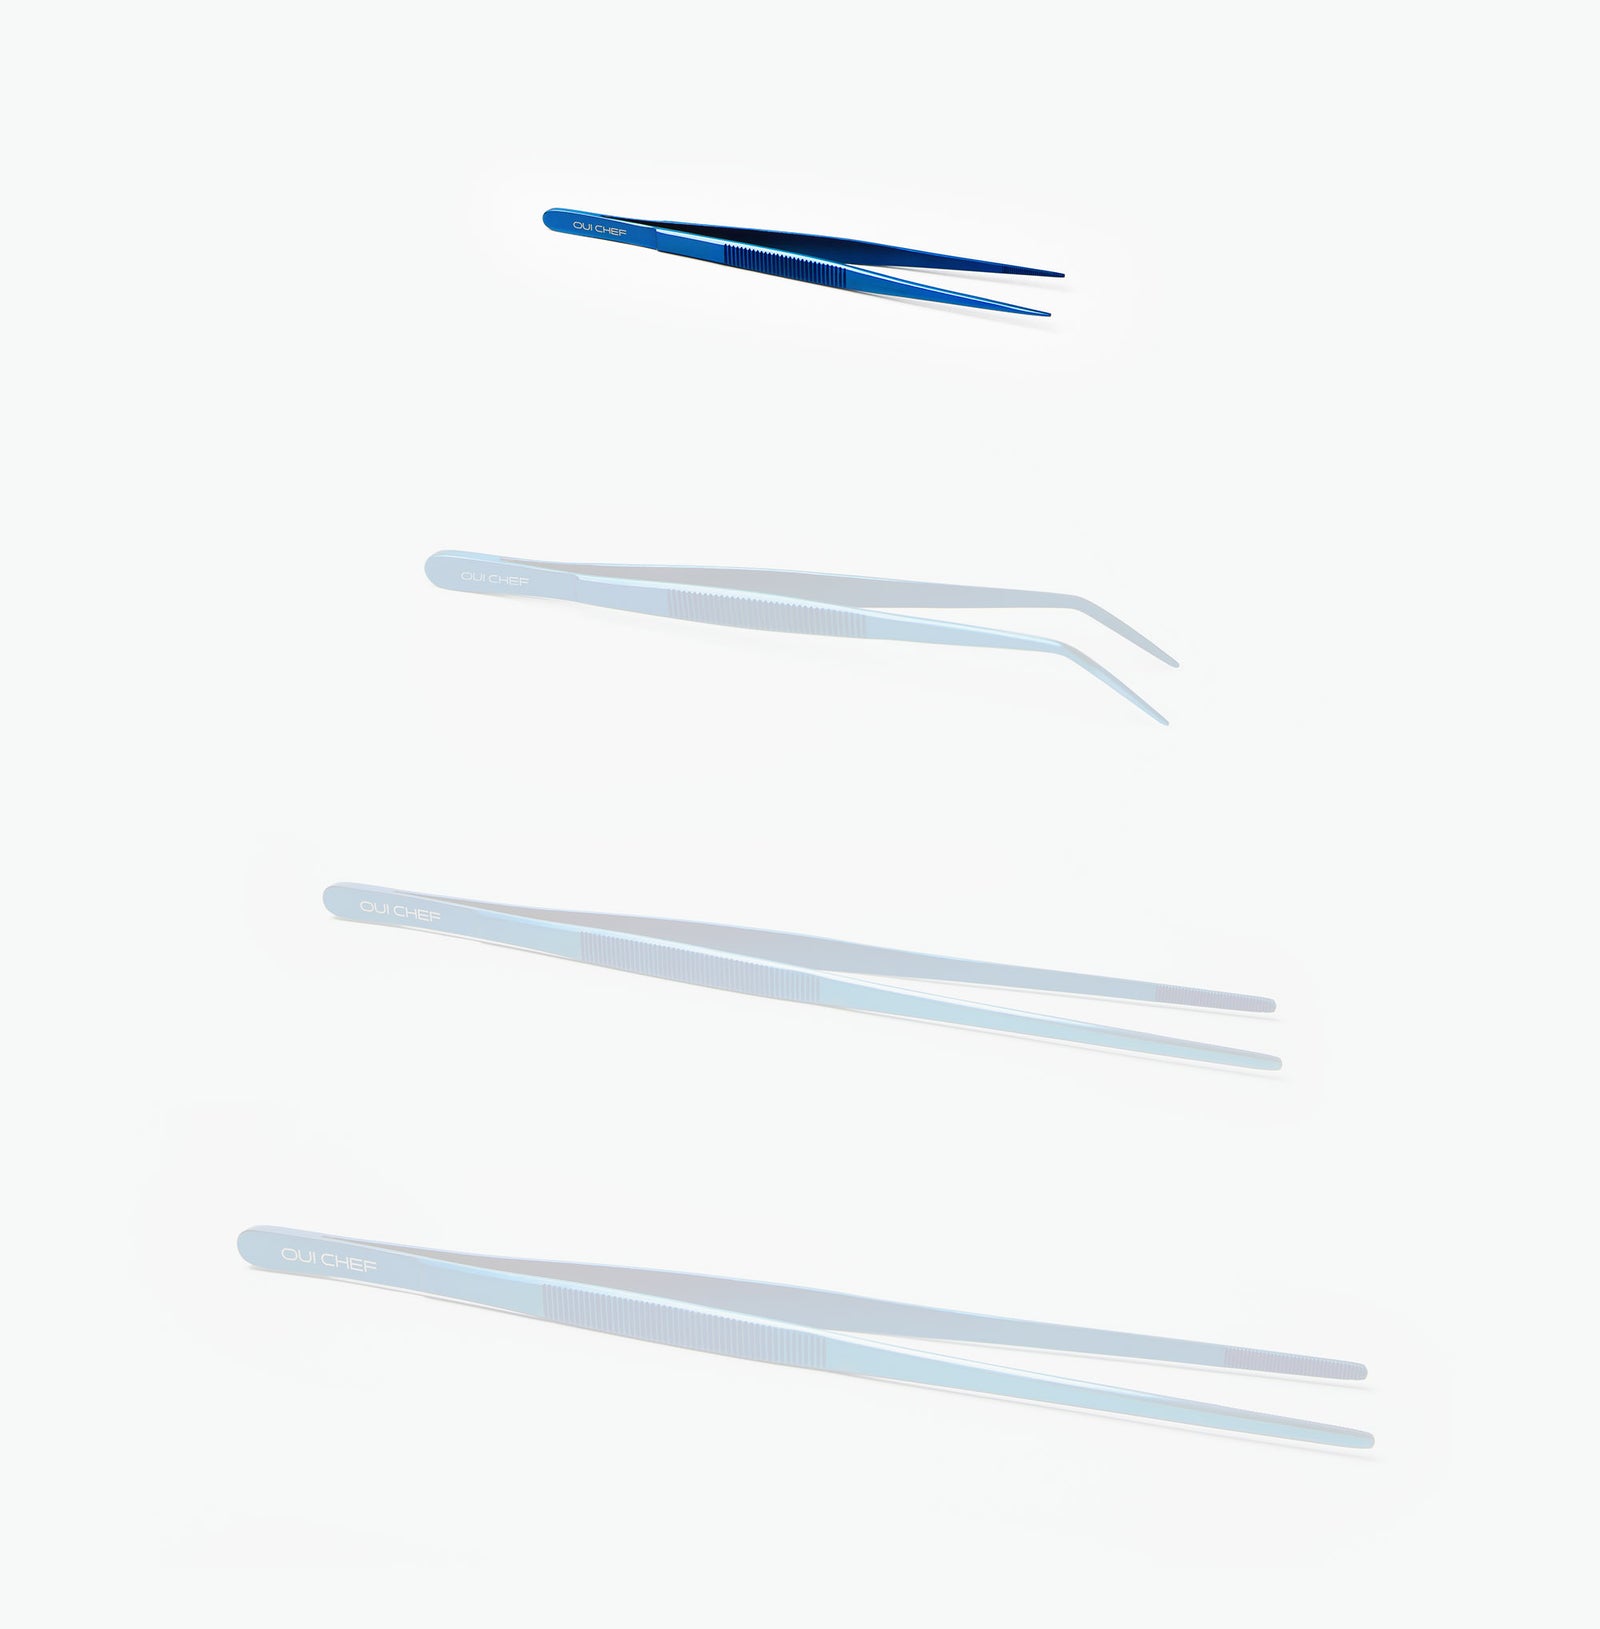 Size guide image showing different Oui Chef tweezers in blue metallic